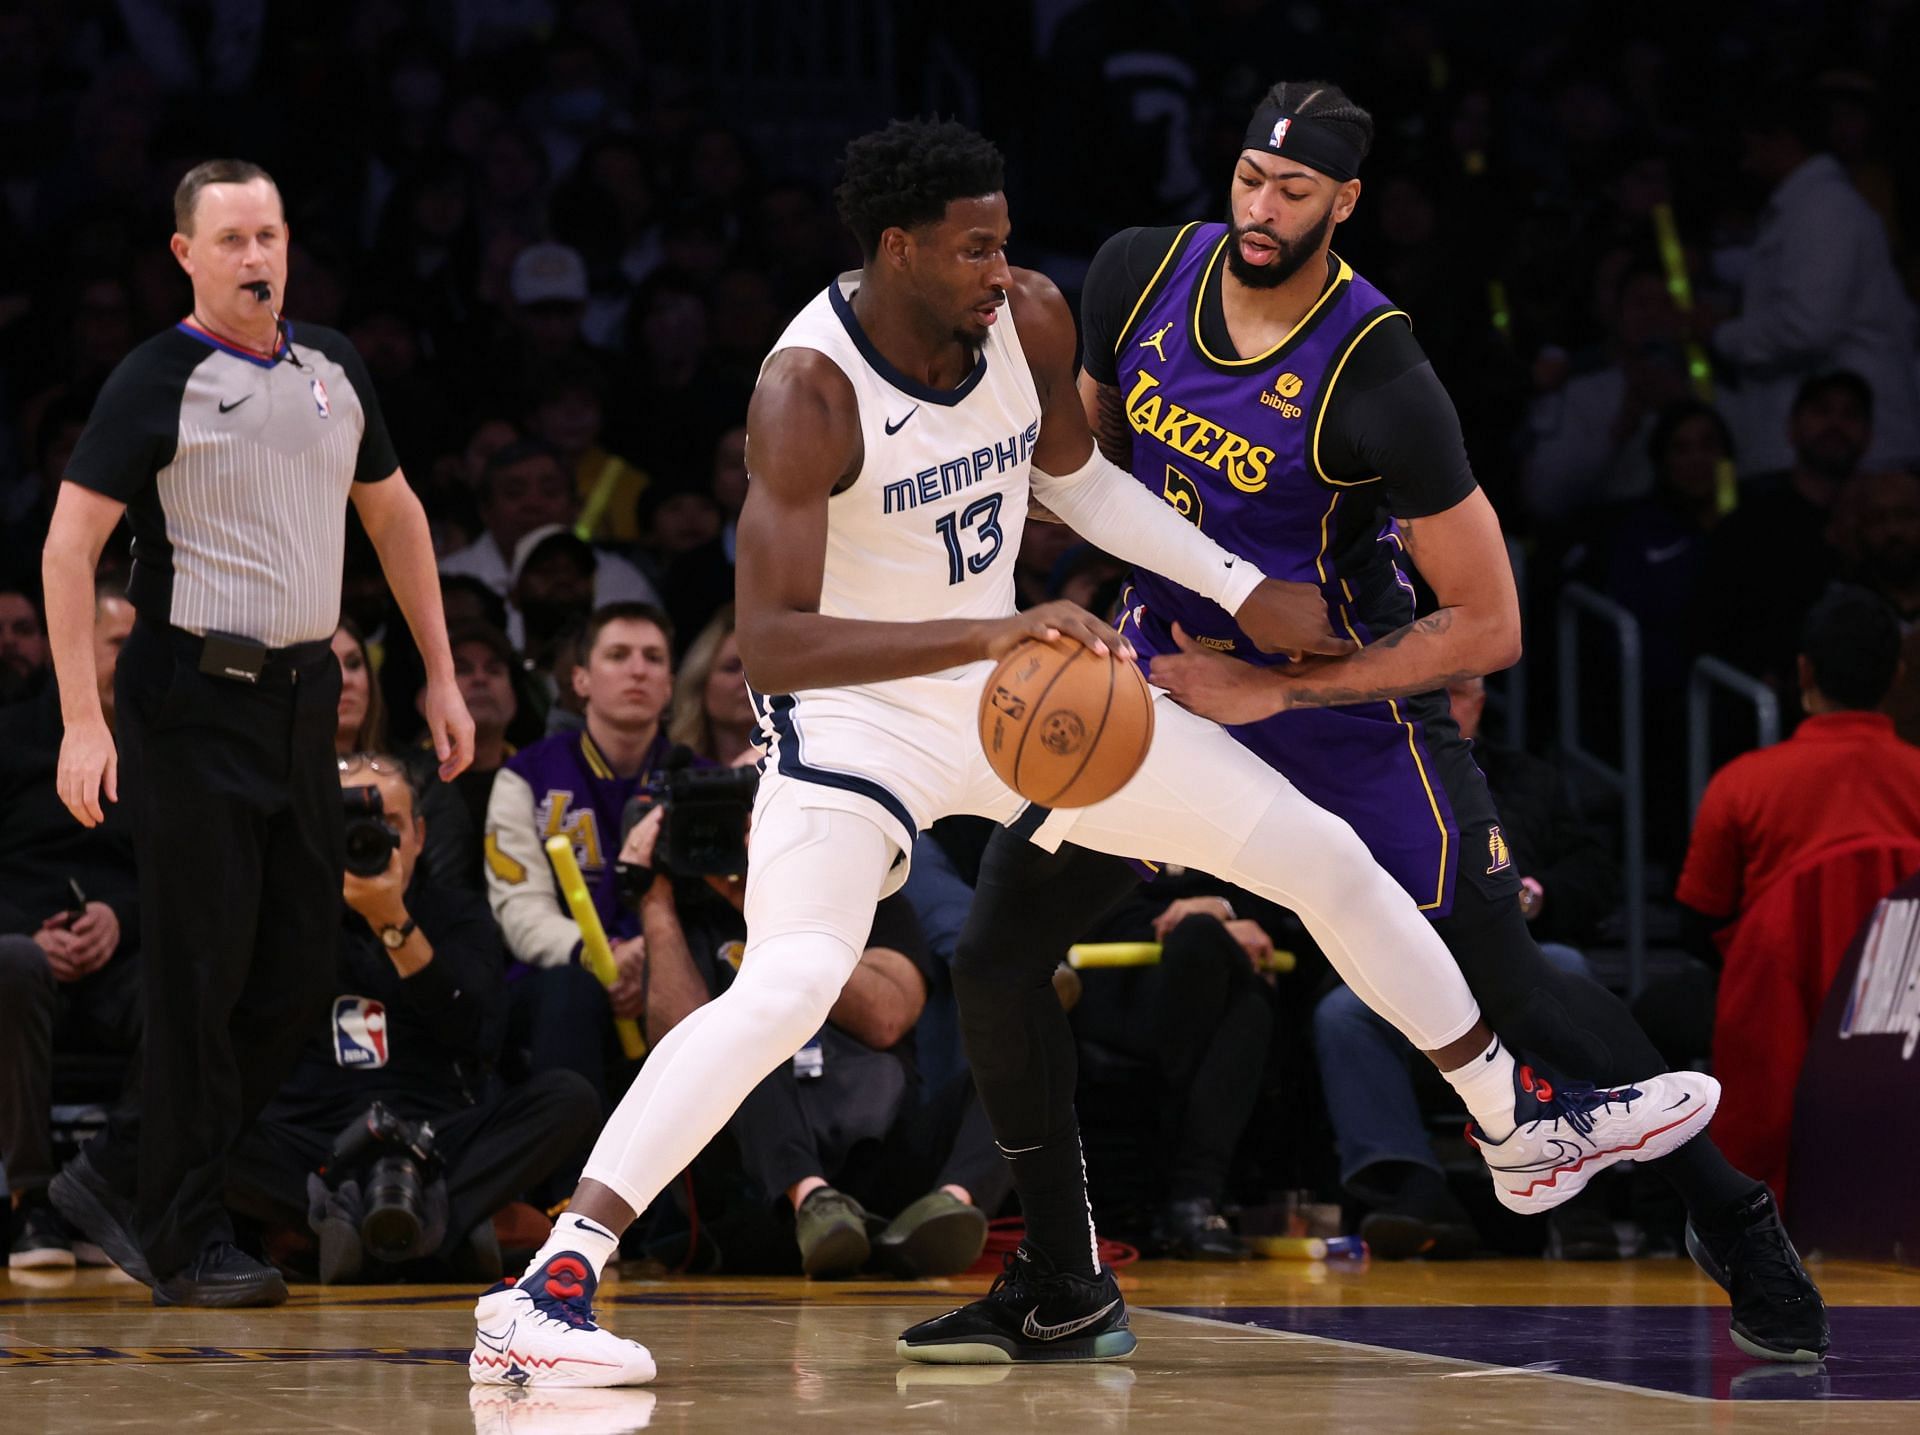 How to watch LA Lakers vs Memphis Grizzlies NBA basketball game tonight?